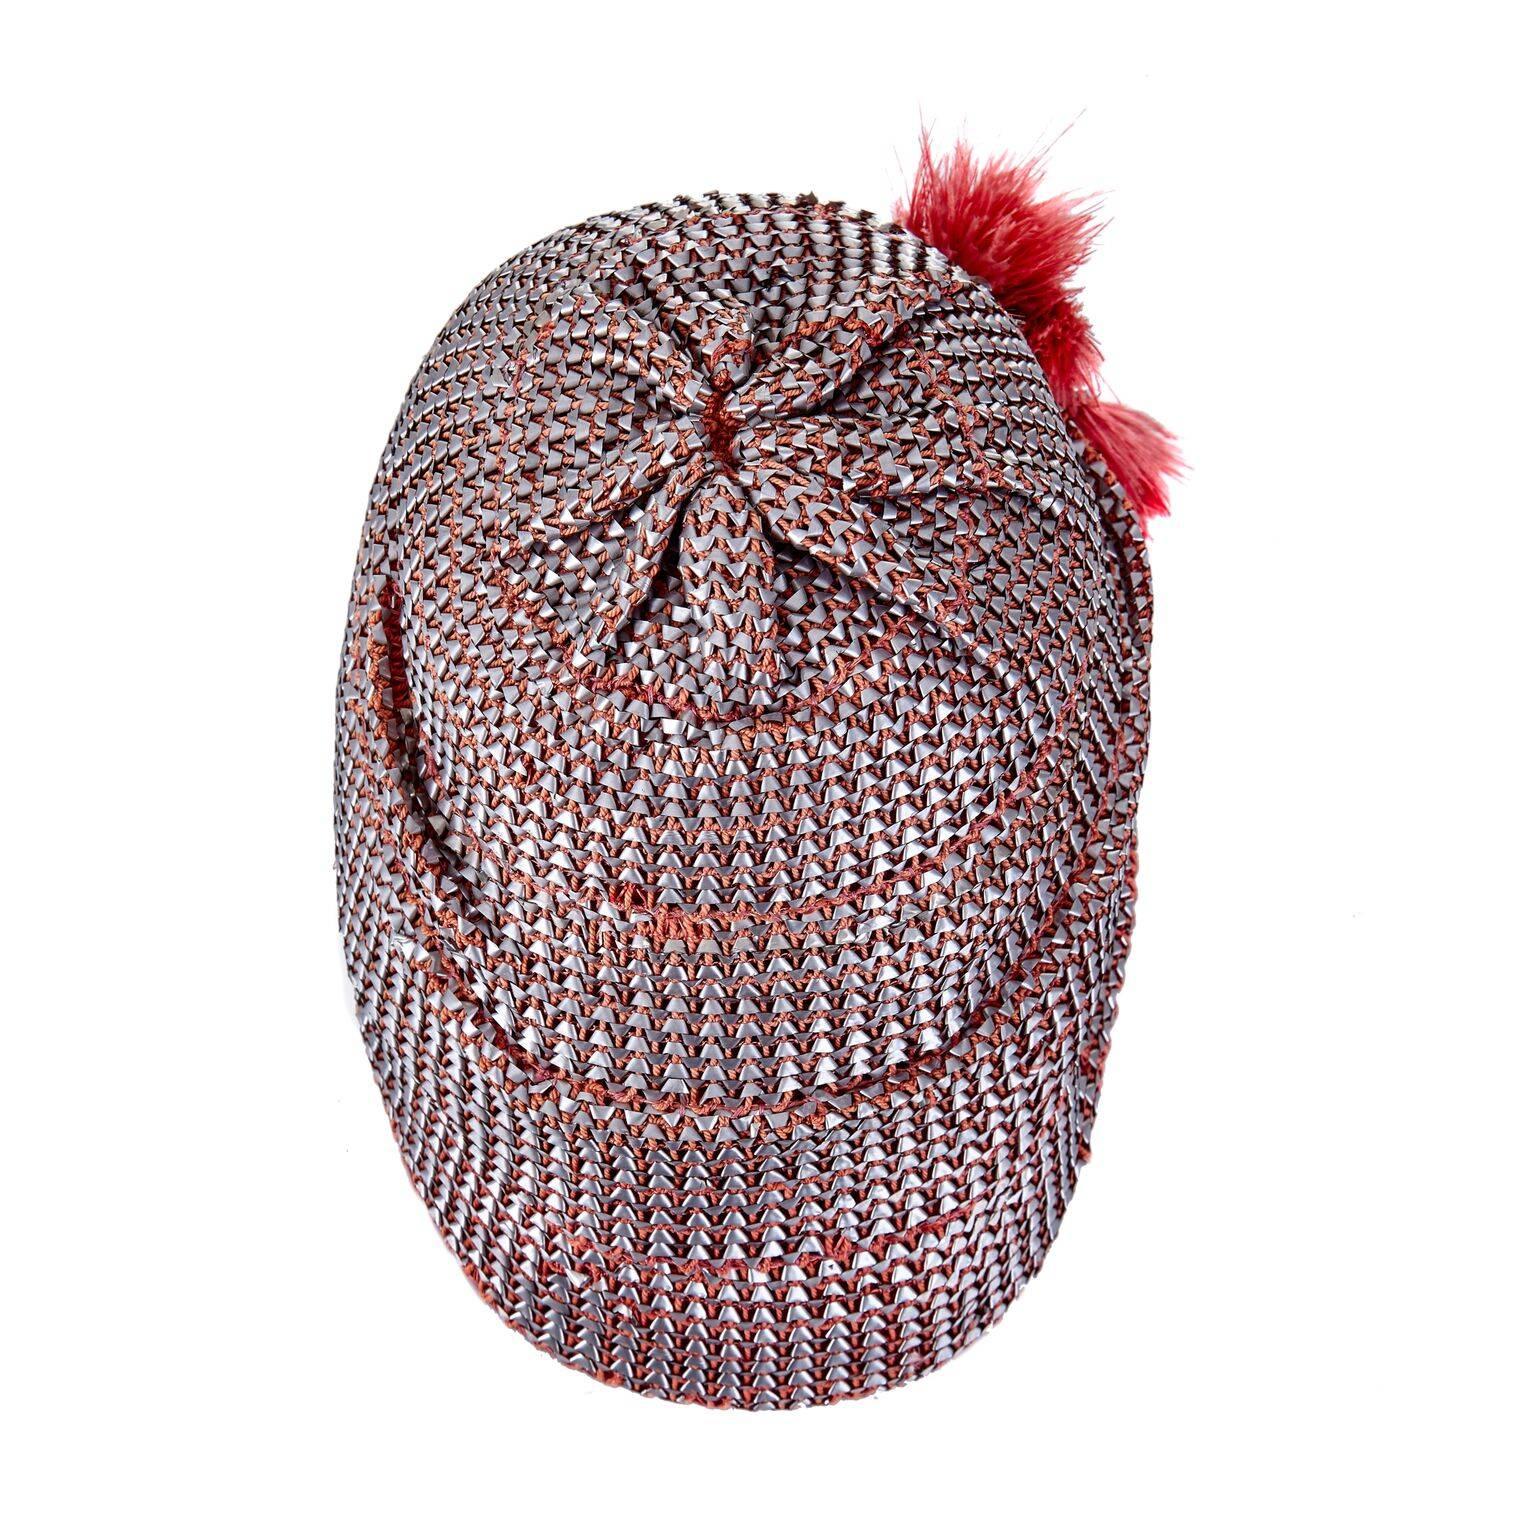 This exquisite 1920s flapper cloche hat with metallic raffia weave is in excellent vintage condition. The hat is molded in soft red felt, with a gross-grain band on in the interior so that the hat easily retains its position when worn. The exterior